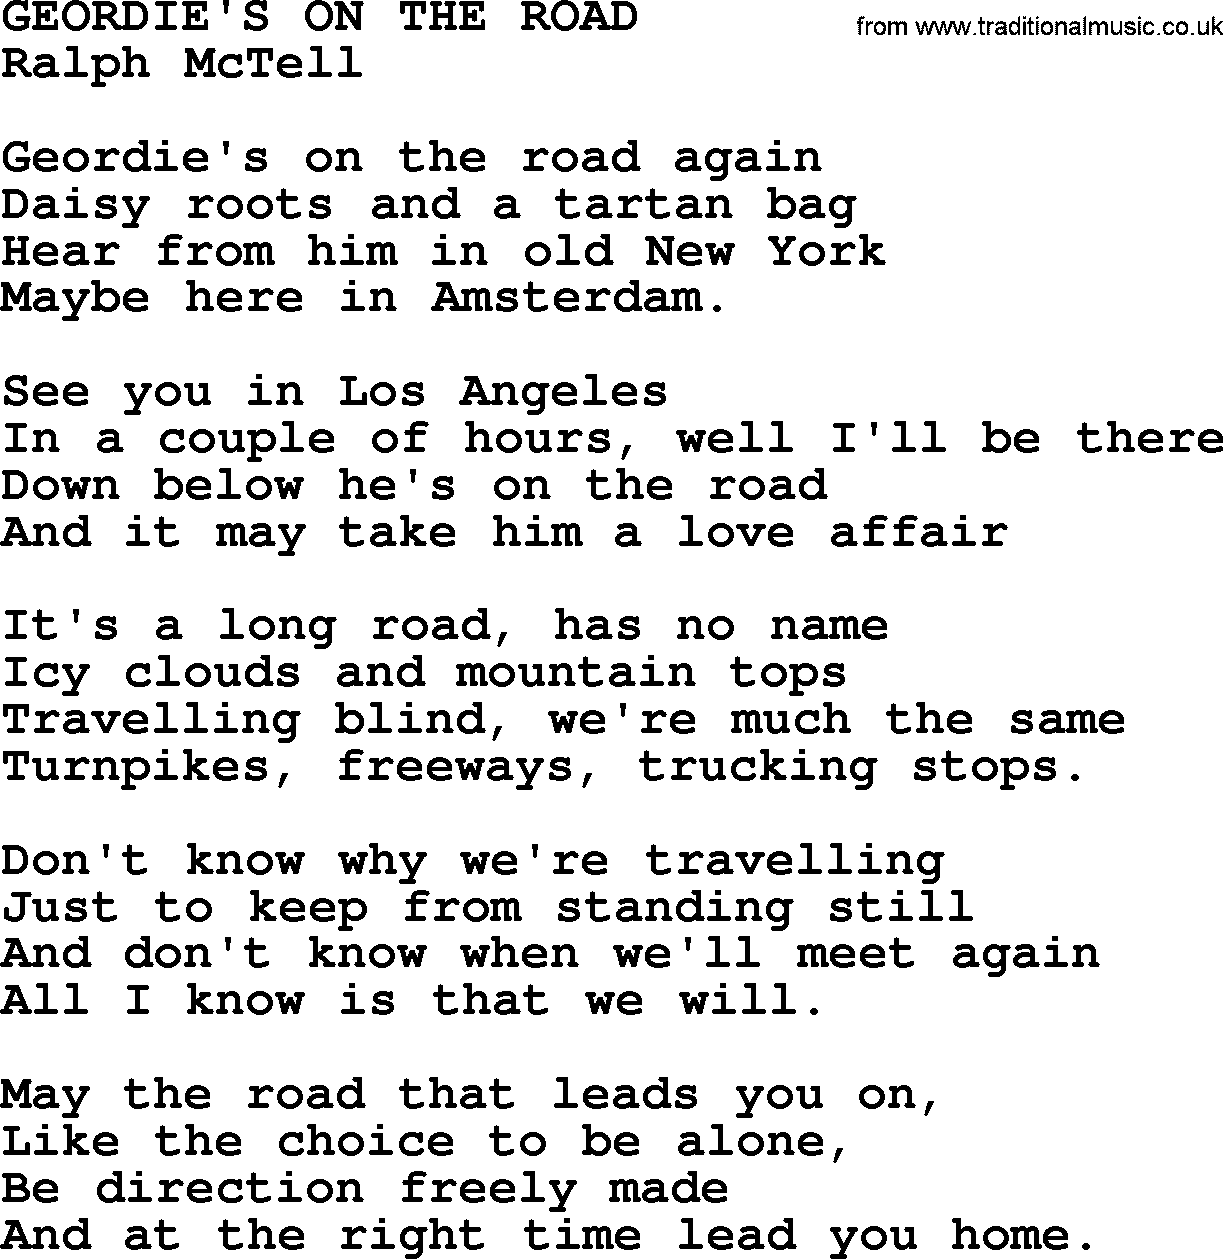 Ralph McTell Song: Geordie's On The Road, lyrics